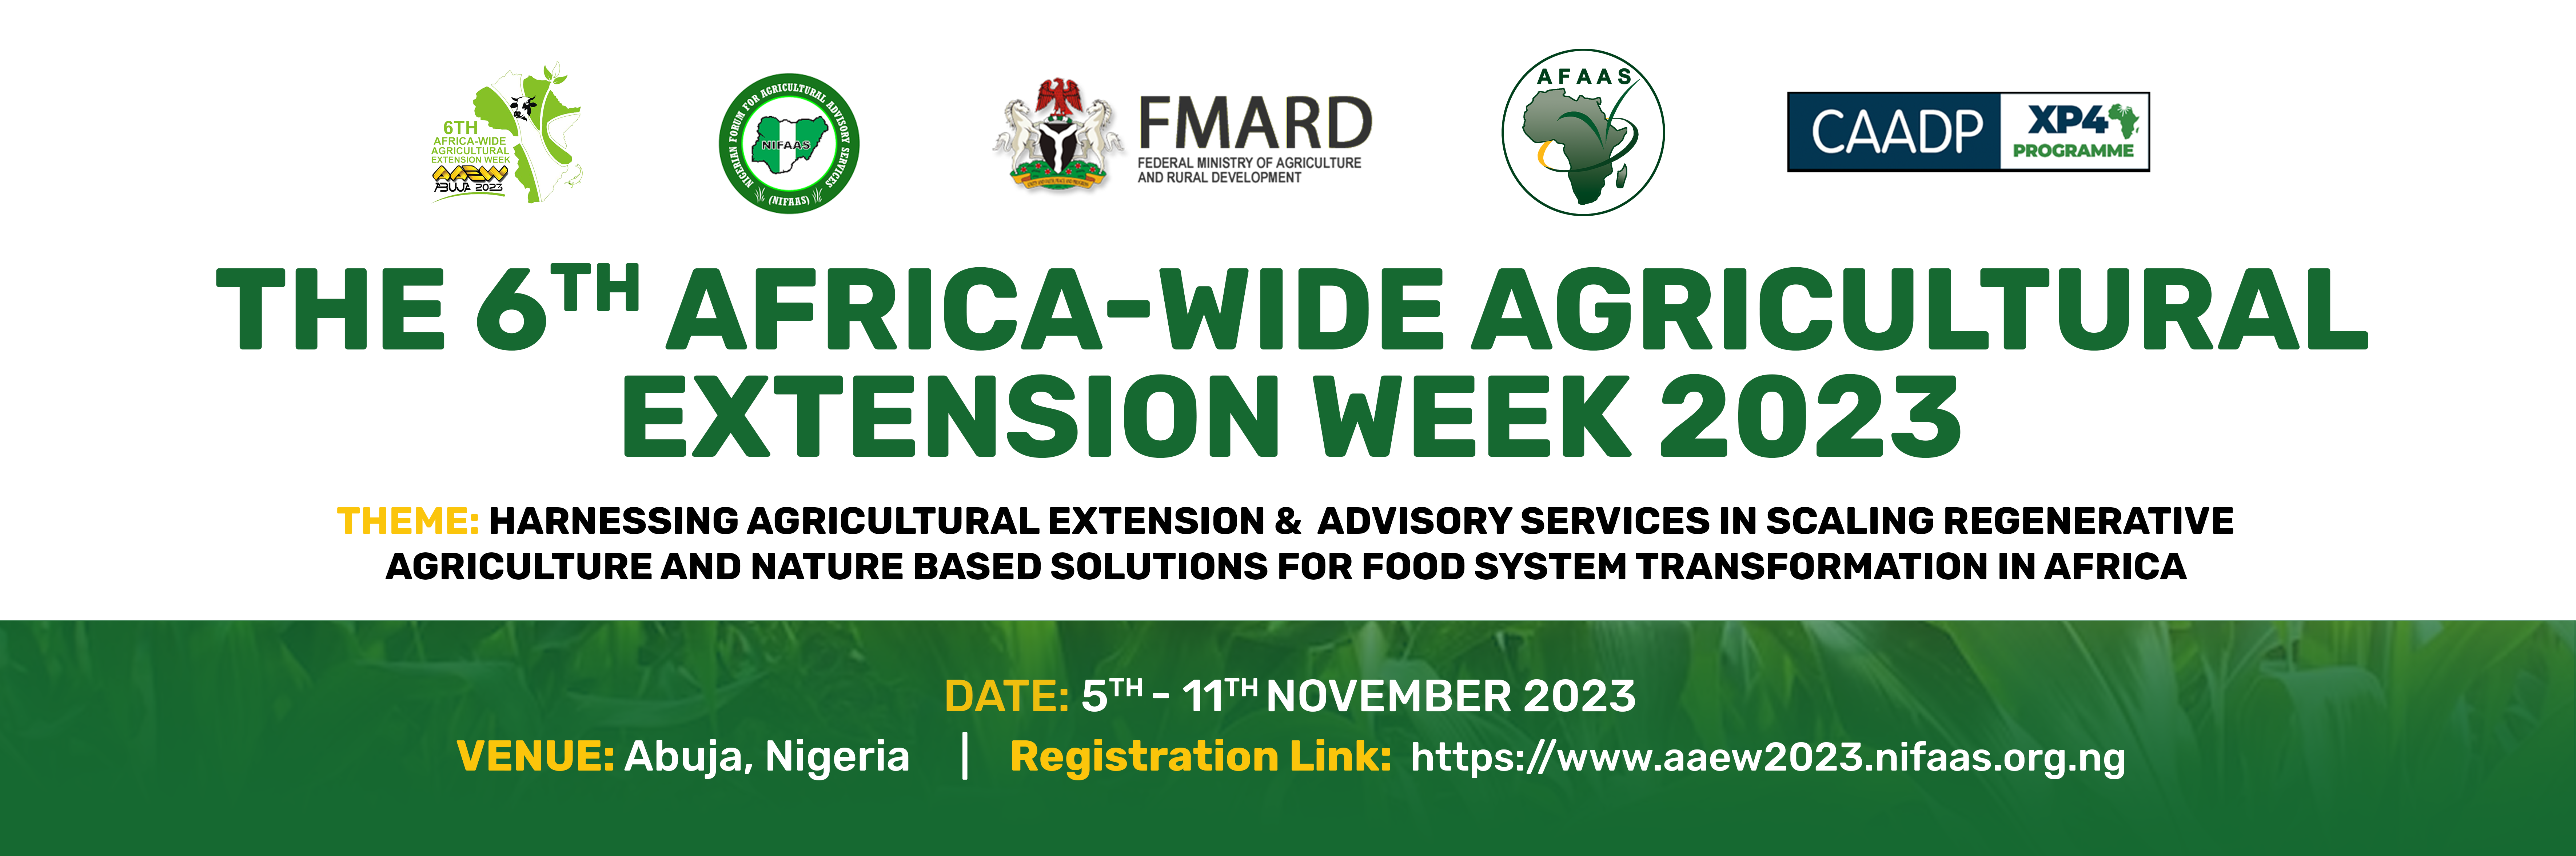 6th Africa Wide Agricultural Extension Week 2023